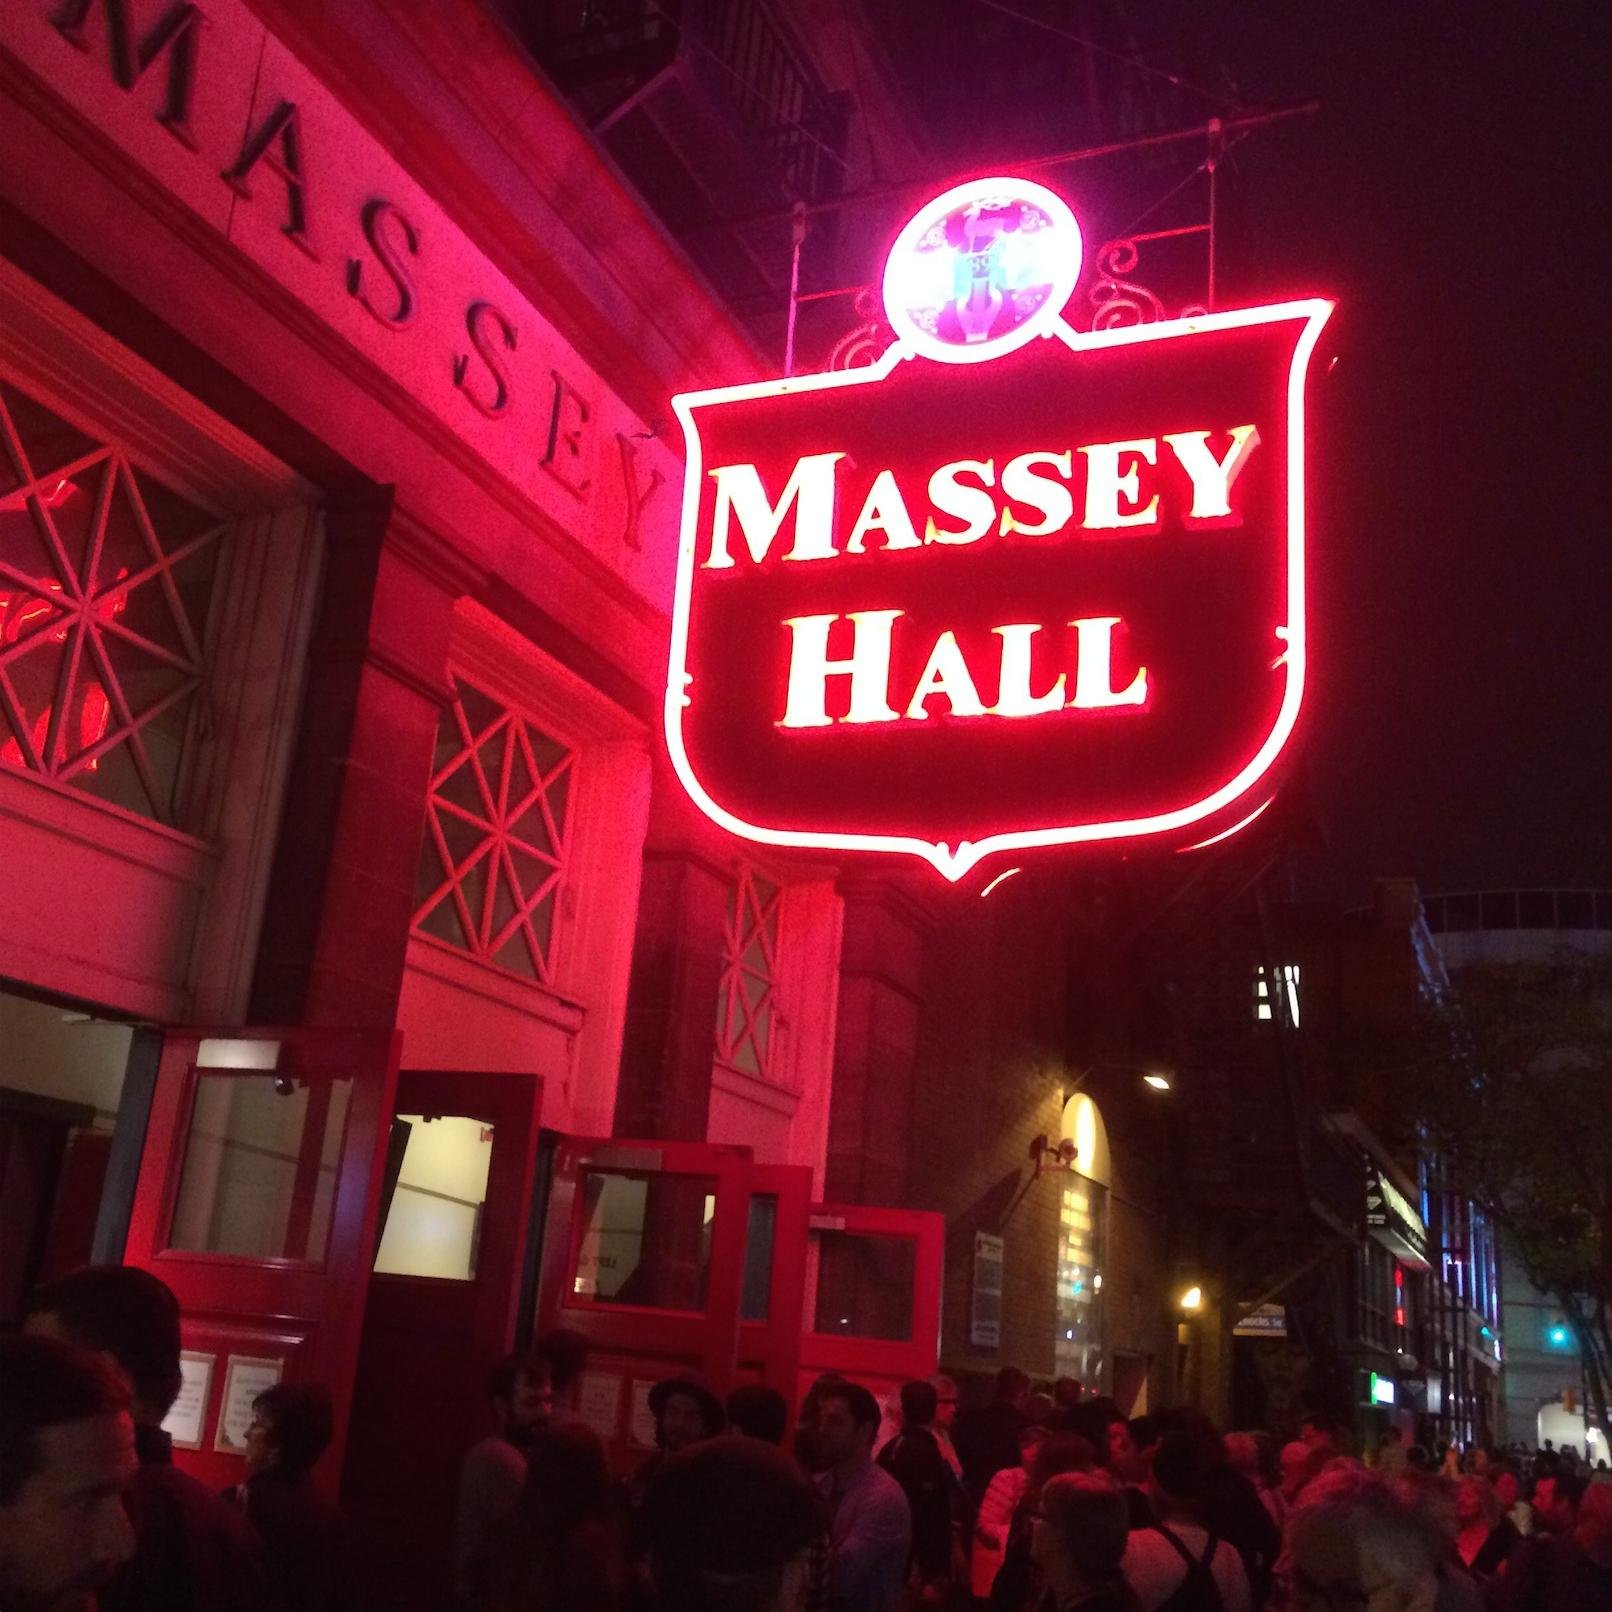 That Night at Massey Hall, a 240-page, limited edition coffee table book, jam-packed with fan stories and rare photos. Order Here: https://t.co/VR5l0ILGeb